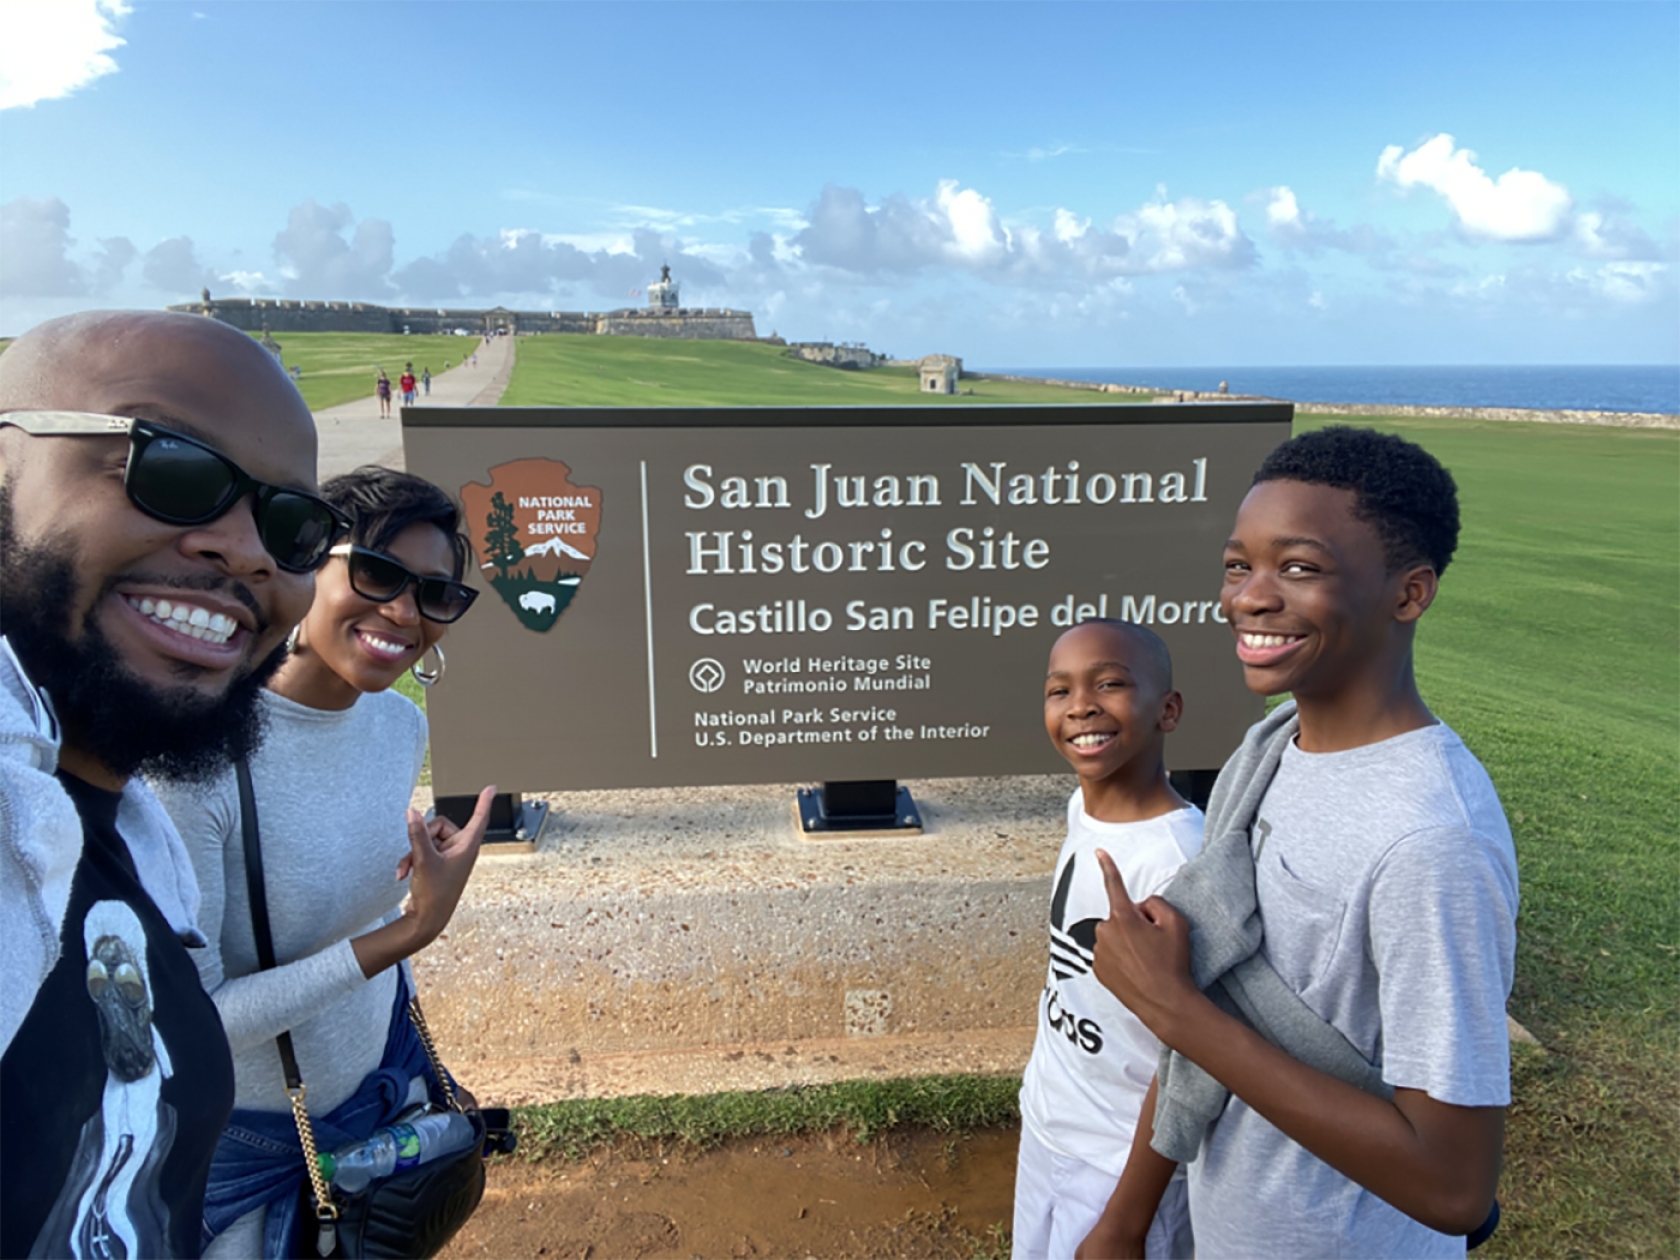 Kev on Stage and his family pose in front of the park sign at San Juan National Historic SIte